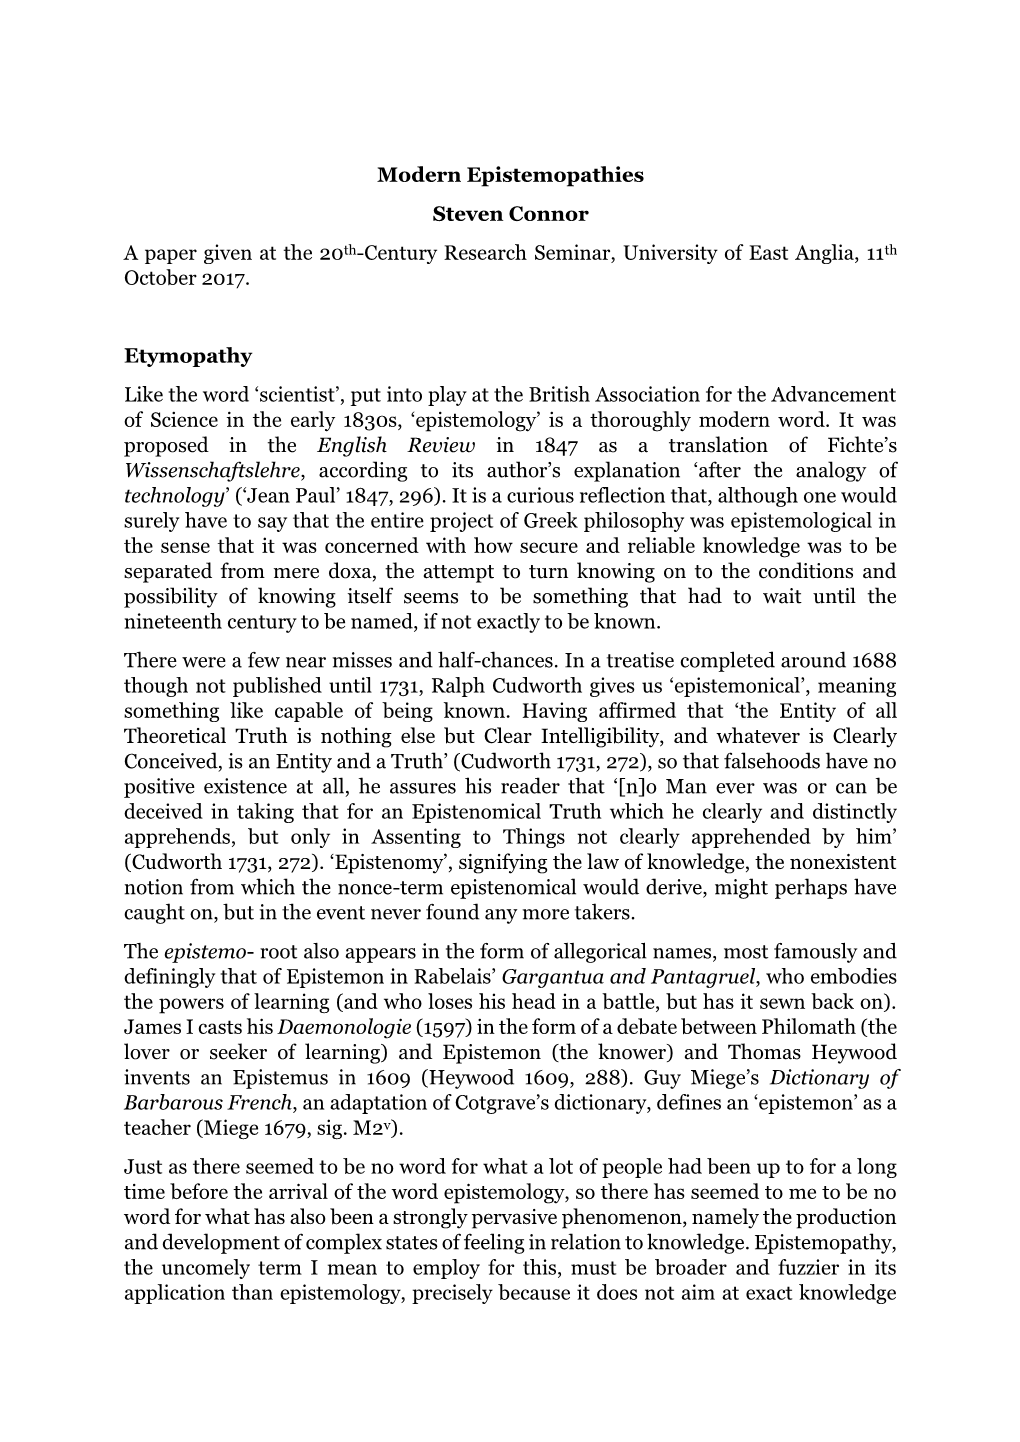 Modern Epistemopathies Steven Connor a Paper Given at the 20Th-Century Research Seminar, University of East Anglia, 11Th October 2017